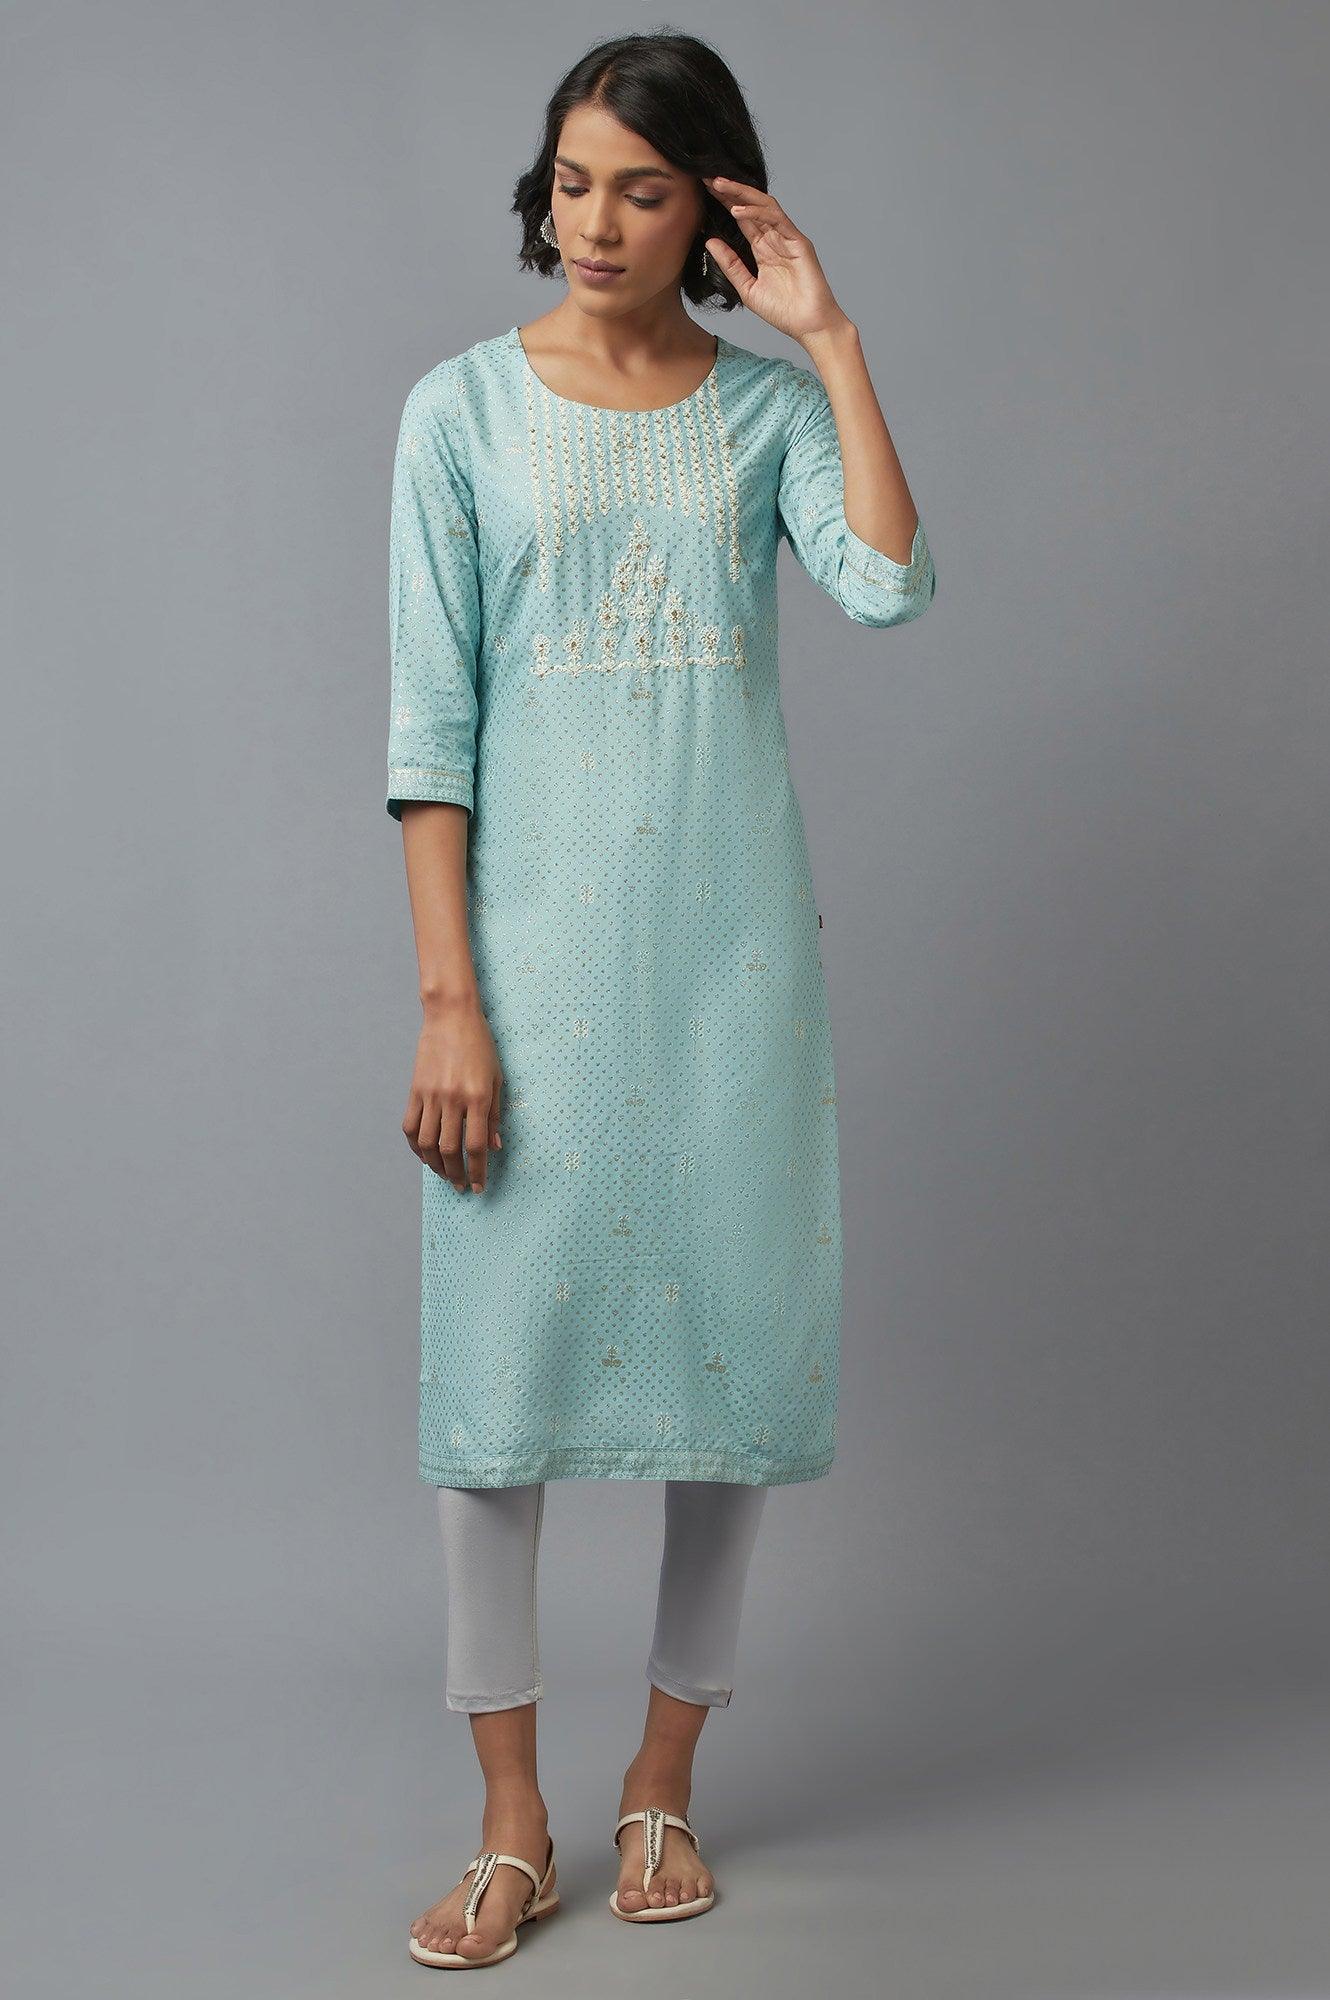 Light Blue Floral Print kurta in Round Neck with Dori Embroidery - wforwoman